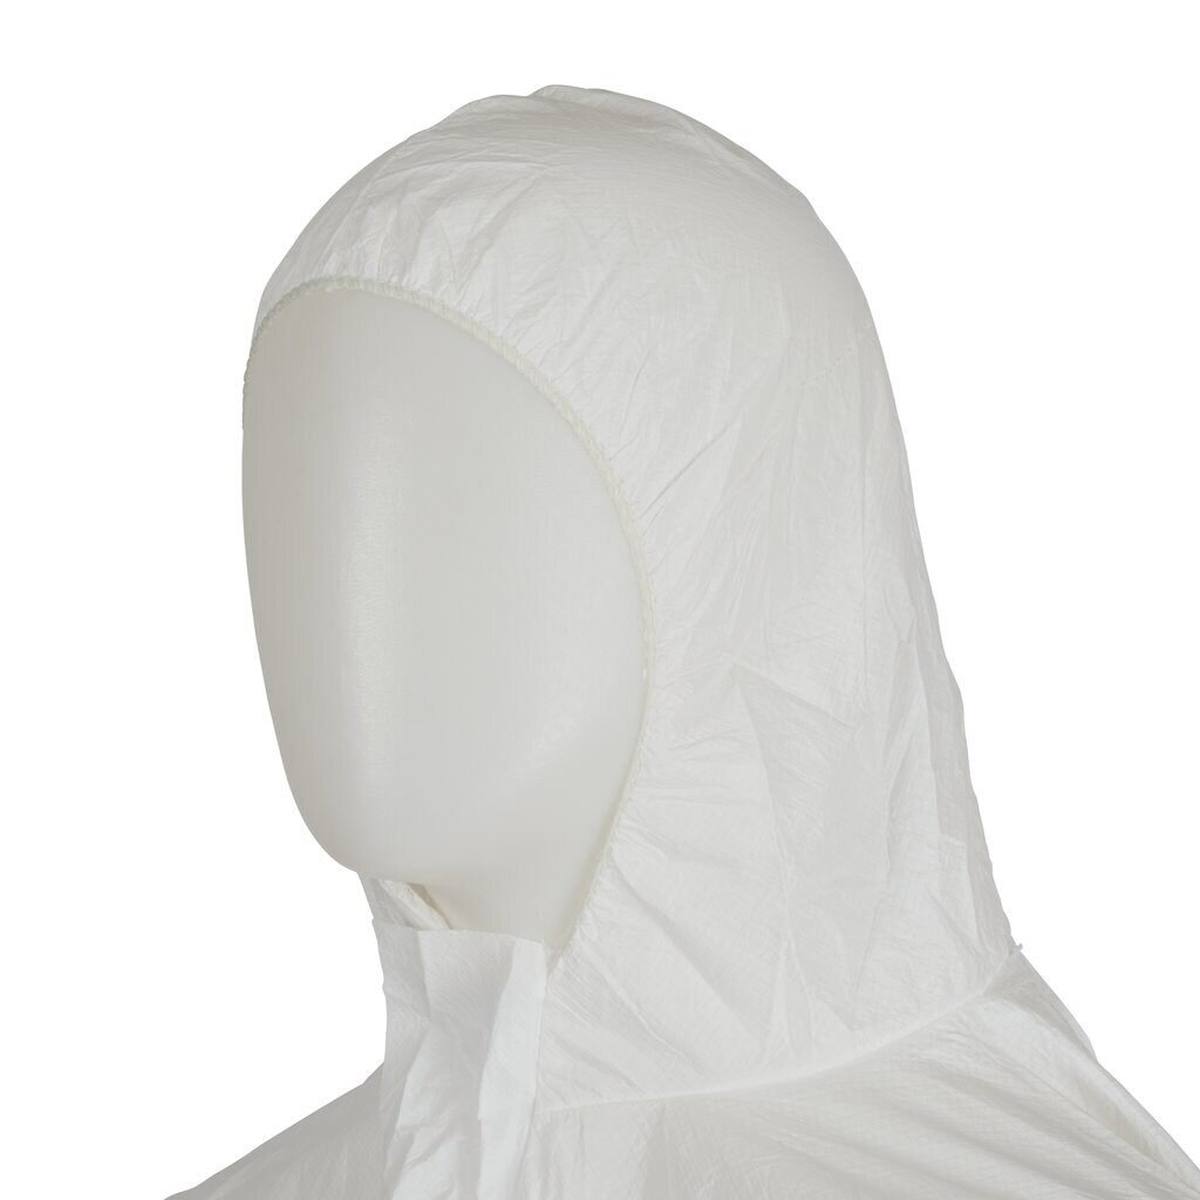 3M 4510 coverall, white, TYPE 5/6, size L, material microporous PE laminate, elastic band finish